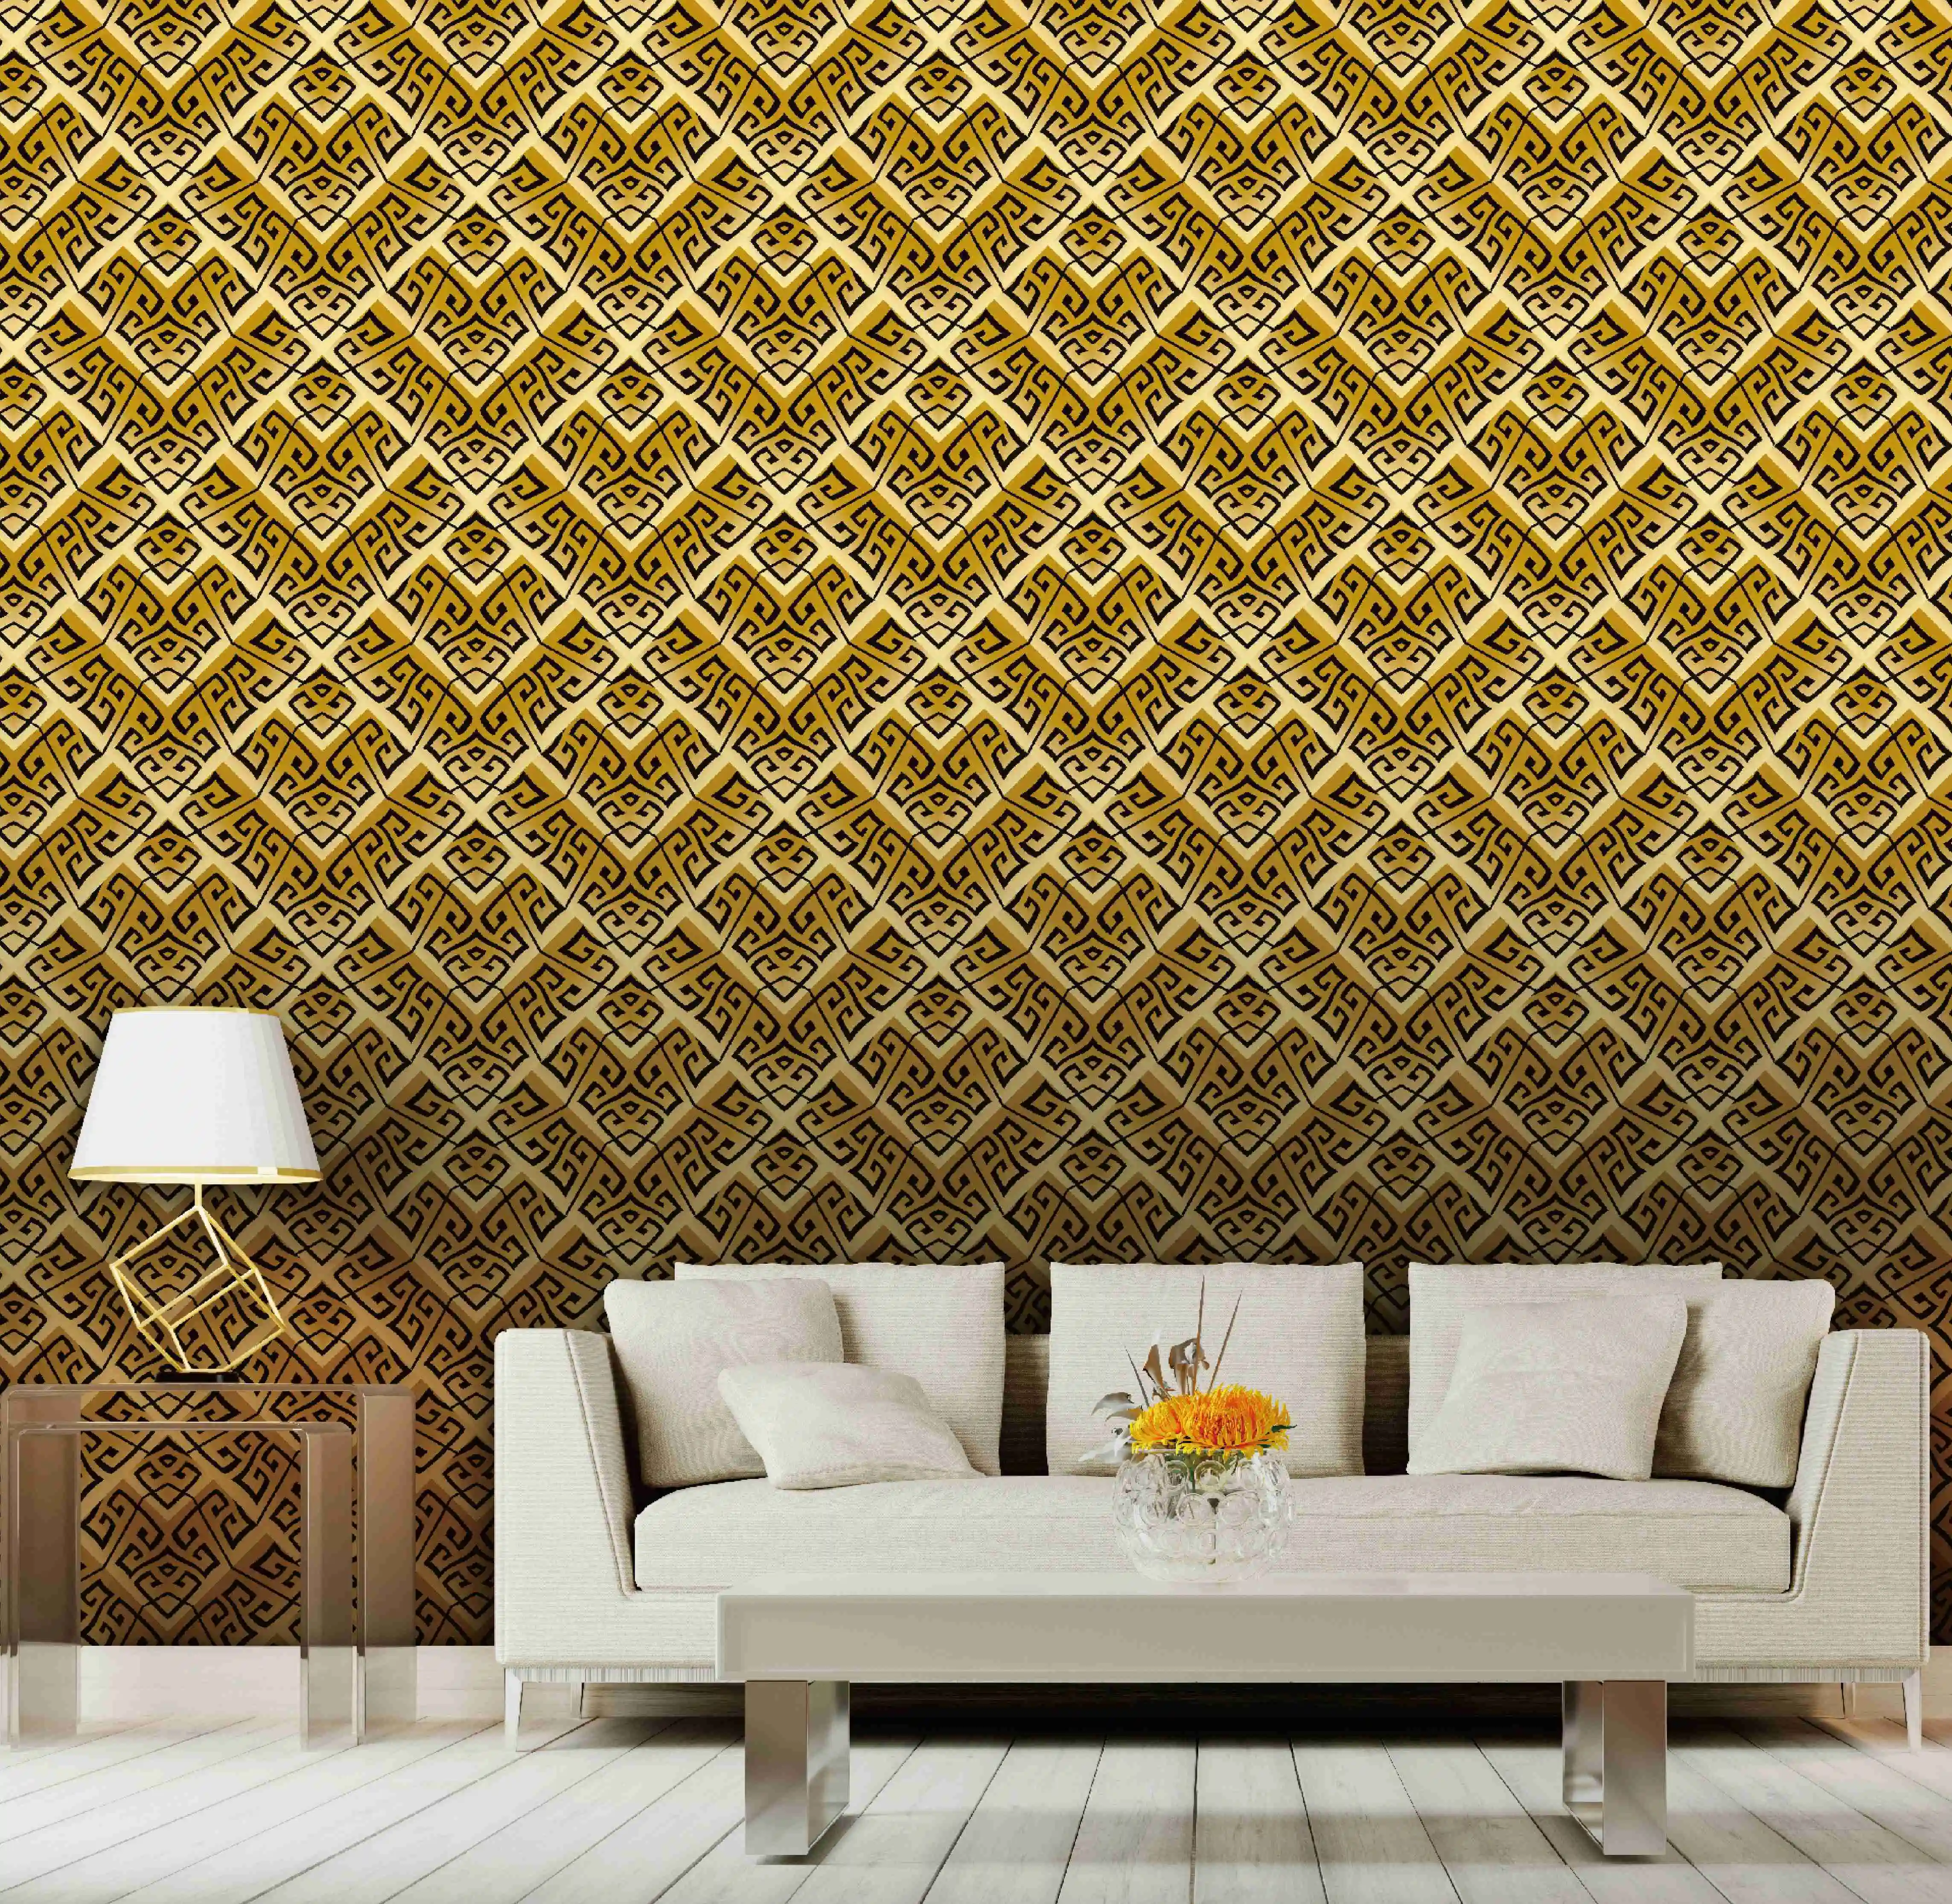 Home Wallpaper 2022 Best Sell Wall Paper Factory Price Modern Geometric 3d  Pvc Vinyl Wallpaper Wall Paper For Interior Decor Wor - Buy 2022 Best Sell  Wallpaper Factory Price,Modern Geometric 3d Pvc